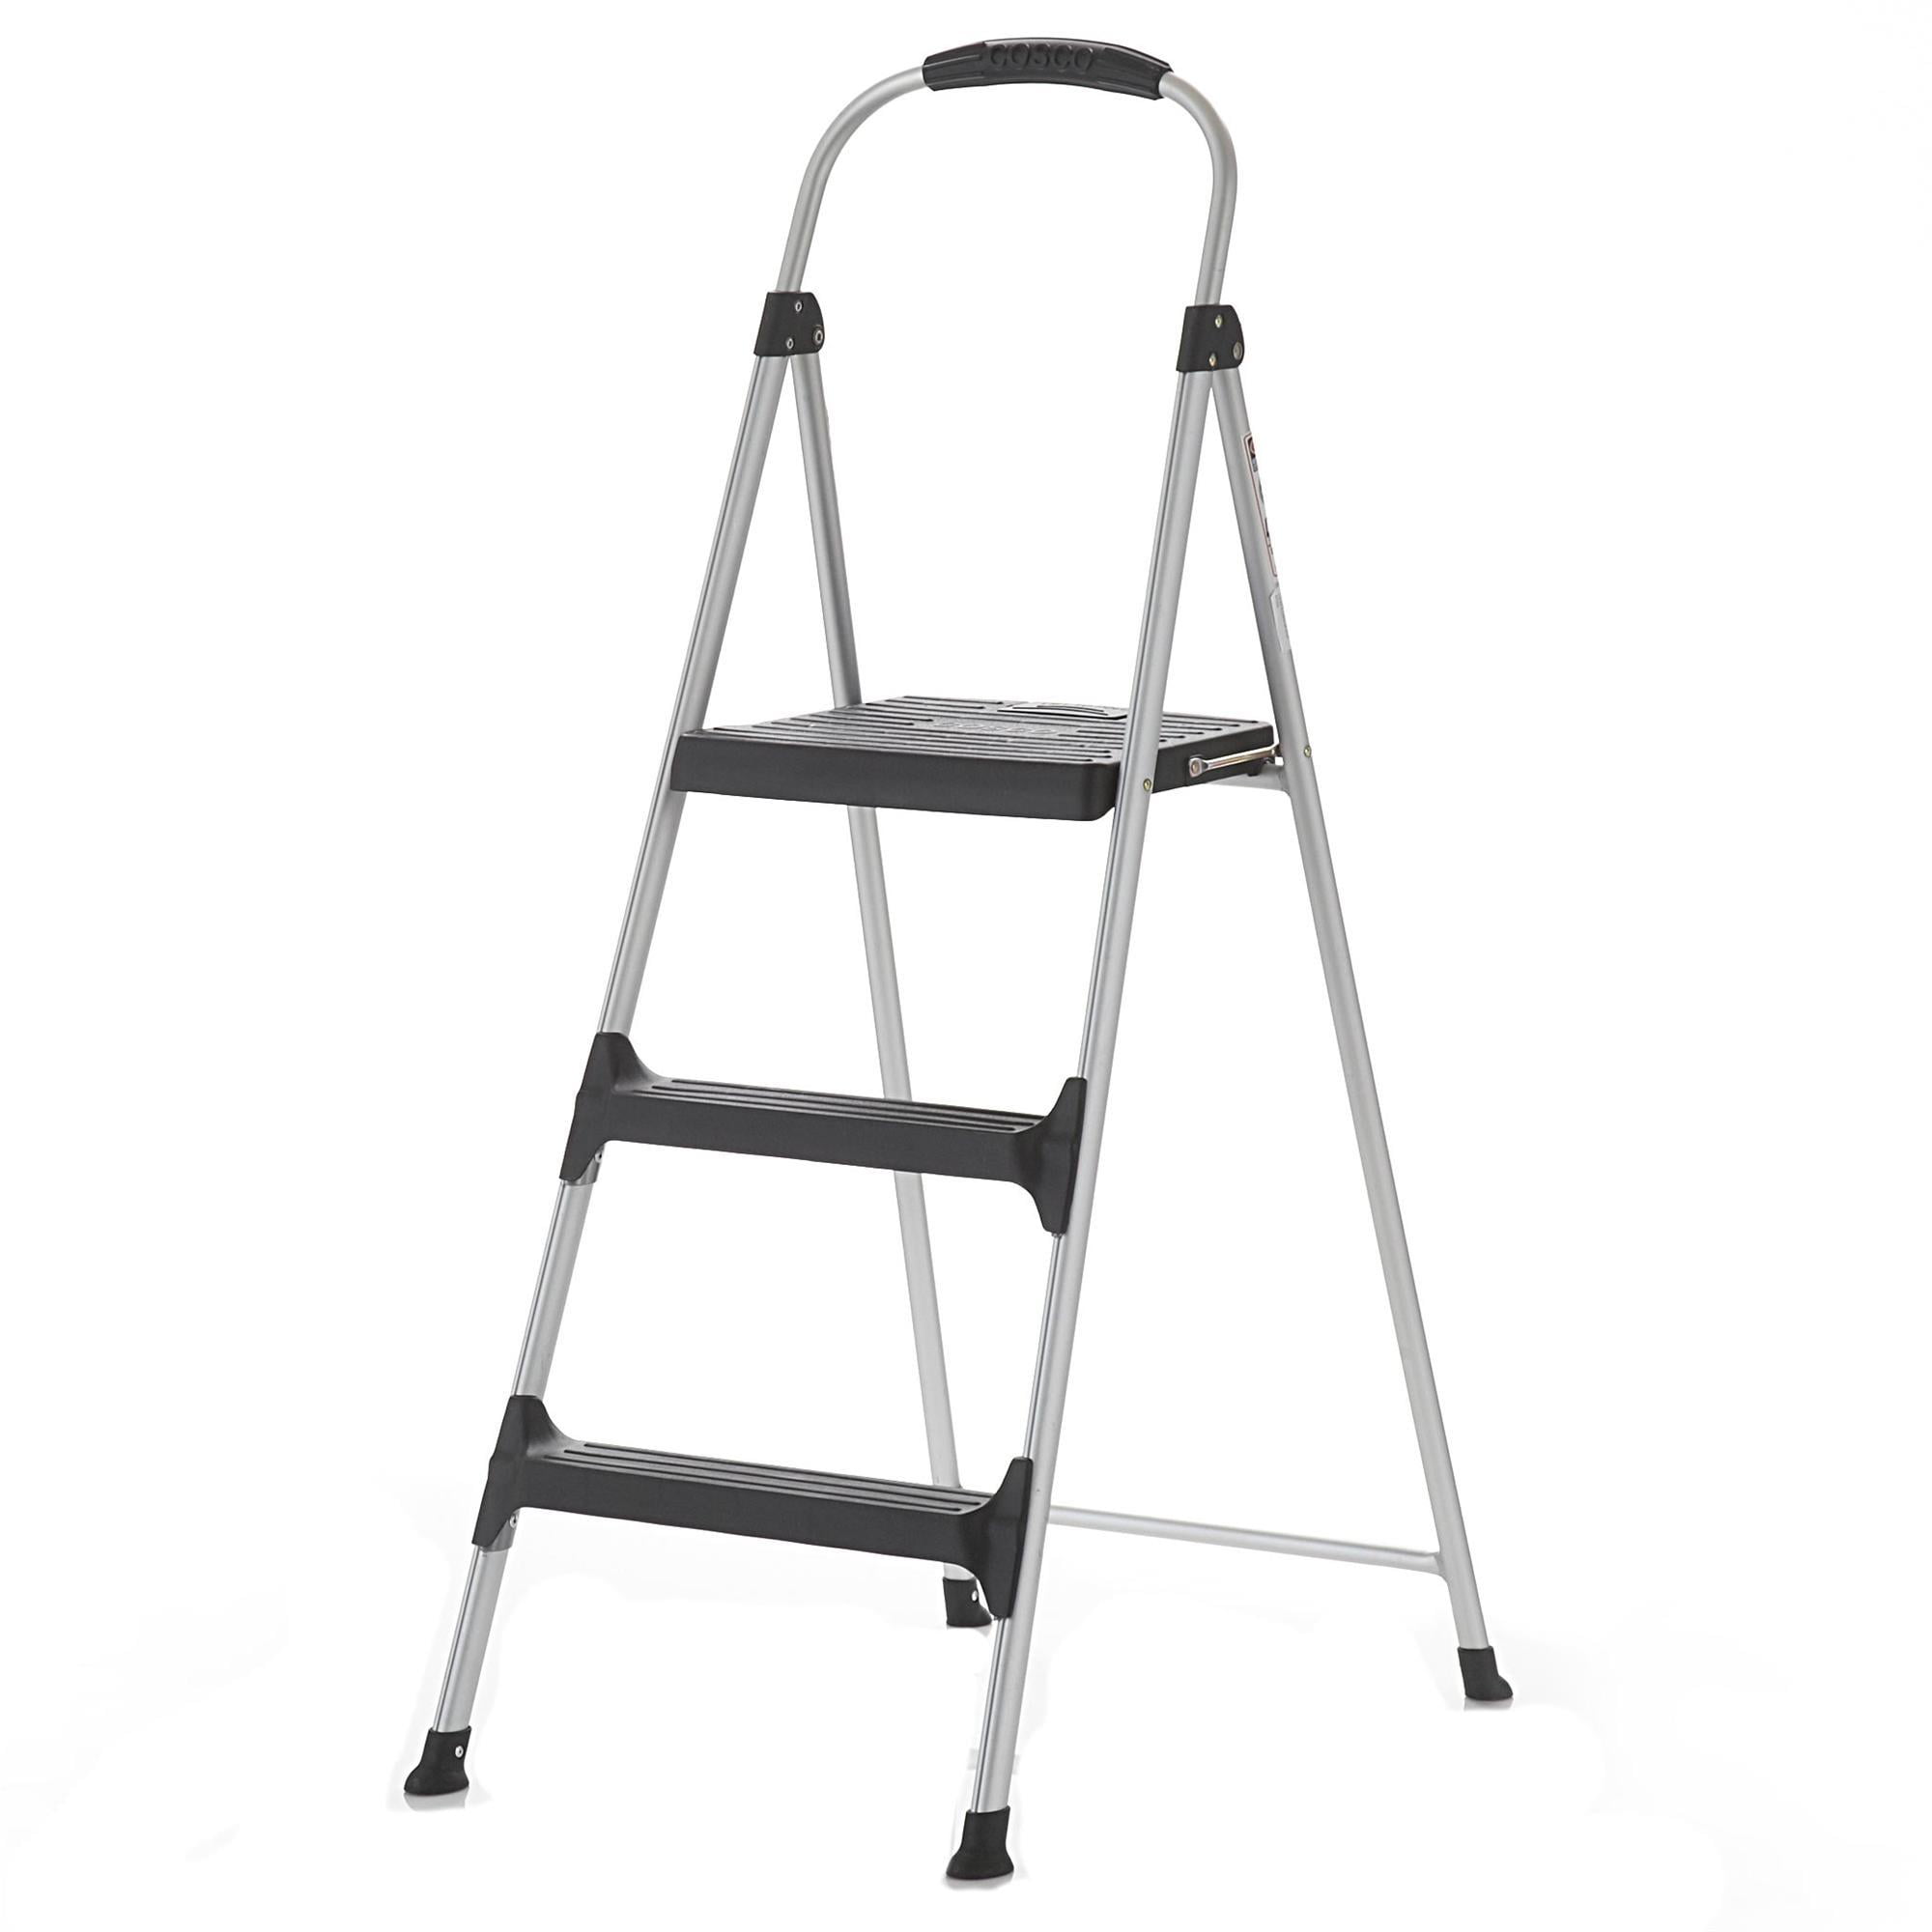 Featured image of post Kitchen Step Stool Uk / Same day delivery 7 days a week £3.95, or fast store collection.